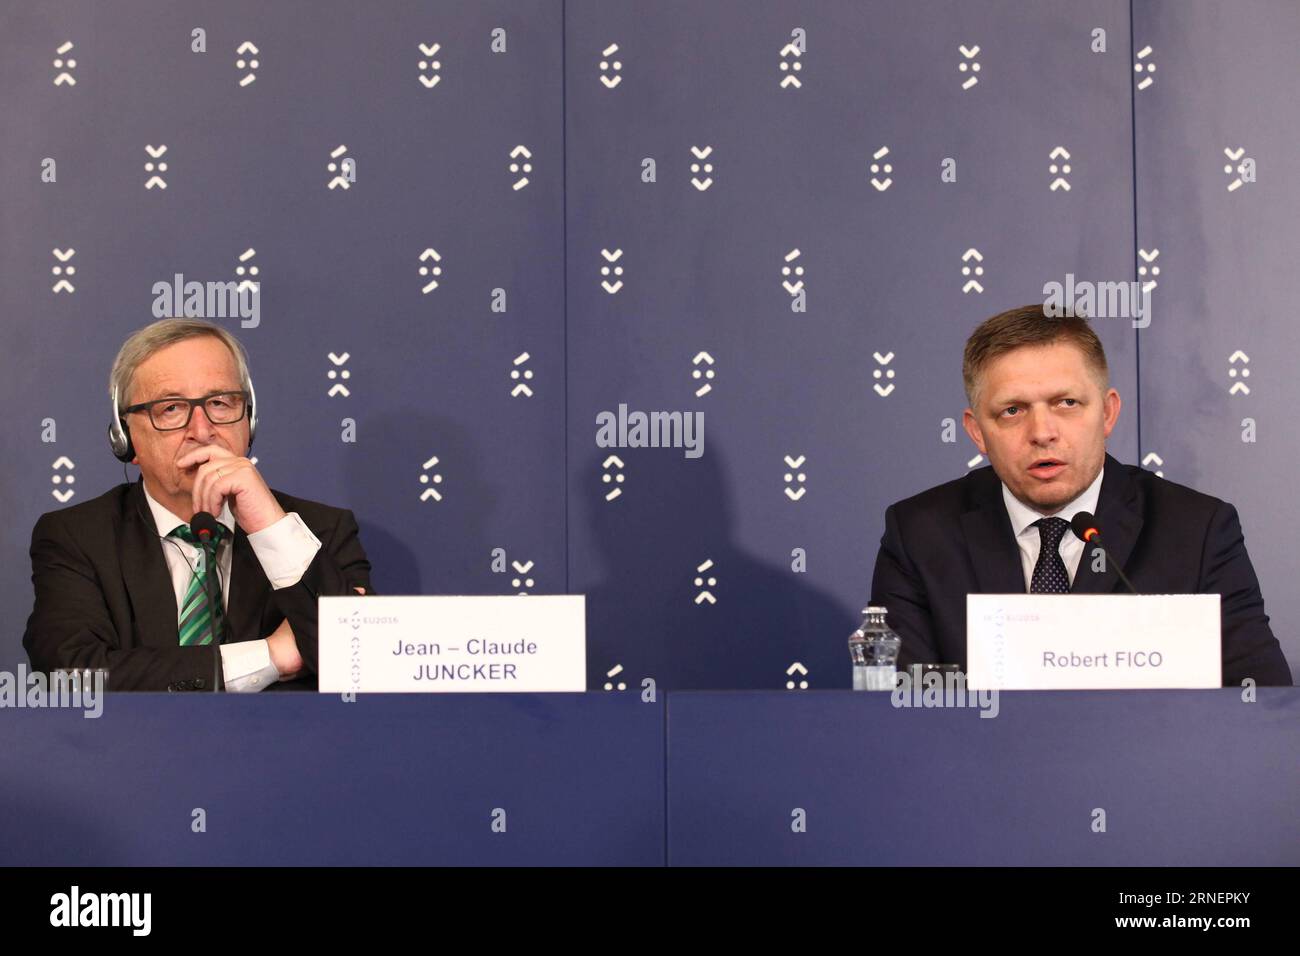 (160701) -- BRATISLAVA, July 1, 2016 -- Slovak Prime minister Robert Fico (R) and European Commission President Jean-Claude Juncker attend the press conference after bilateral meeting in Bratislava, capital of Slovakia, on July 1, 2016. Slovakia officially took over a six-month rotating Presidency of the Council of the European Union (EU) from the Netherlands on Friday. ) SLOVAKIA-BRATISLAVA-PRESIDENCY OF EU COUNCIL AndrejxKlizan PUBLICATIONxNOTxINxCHN   160701 Bratislava July 1 2016 Slovak Prime Ministers Robert Fico r and European Commission President Jean Claude Juncker attend The Press Con Stock Photo